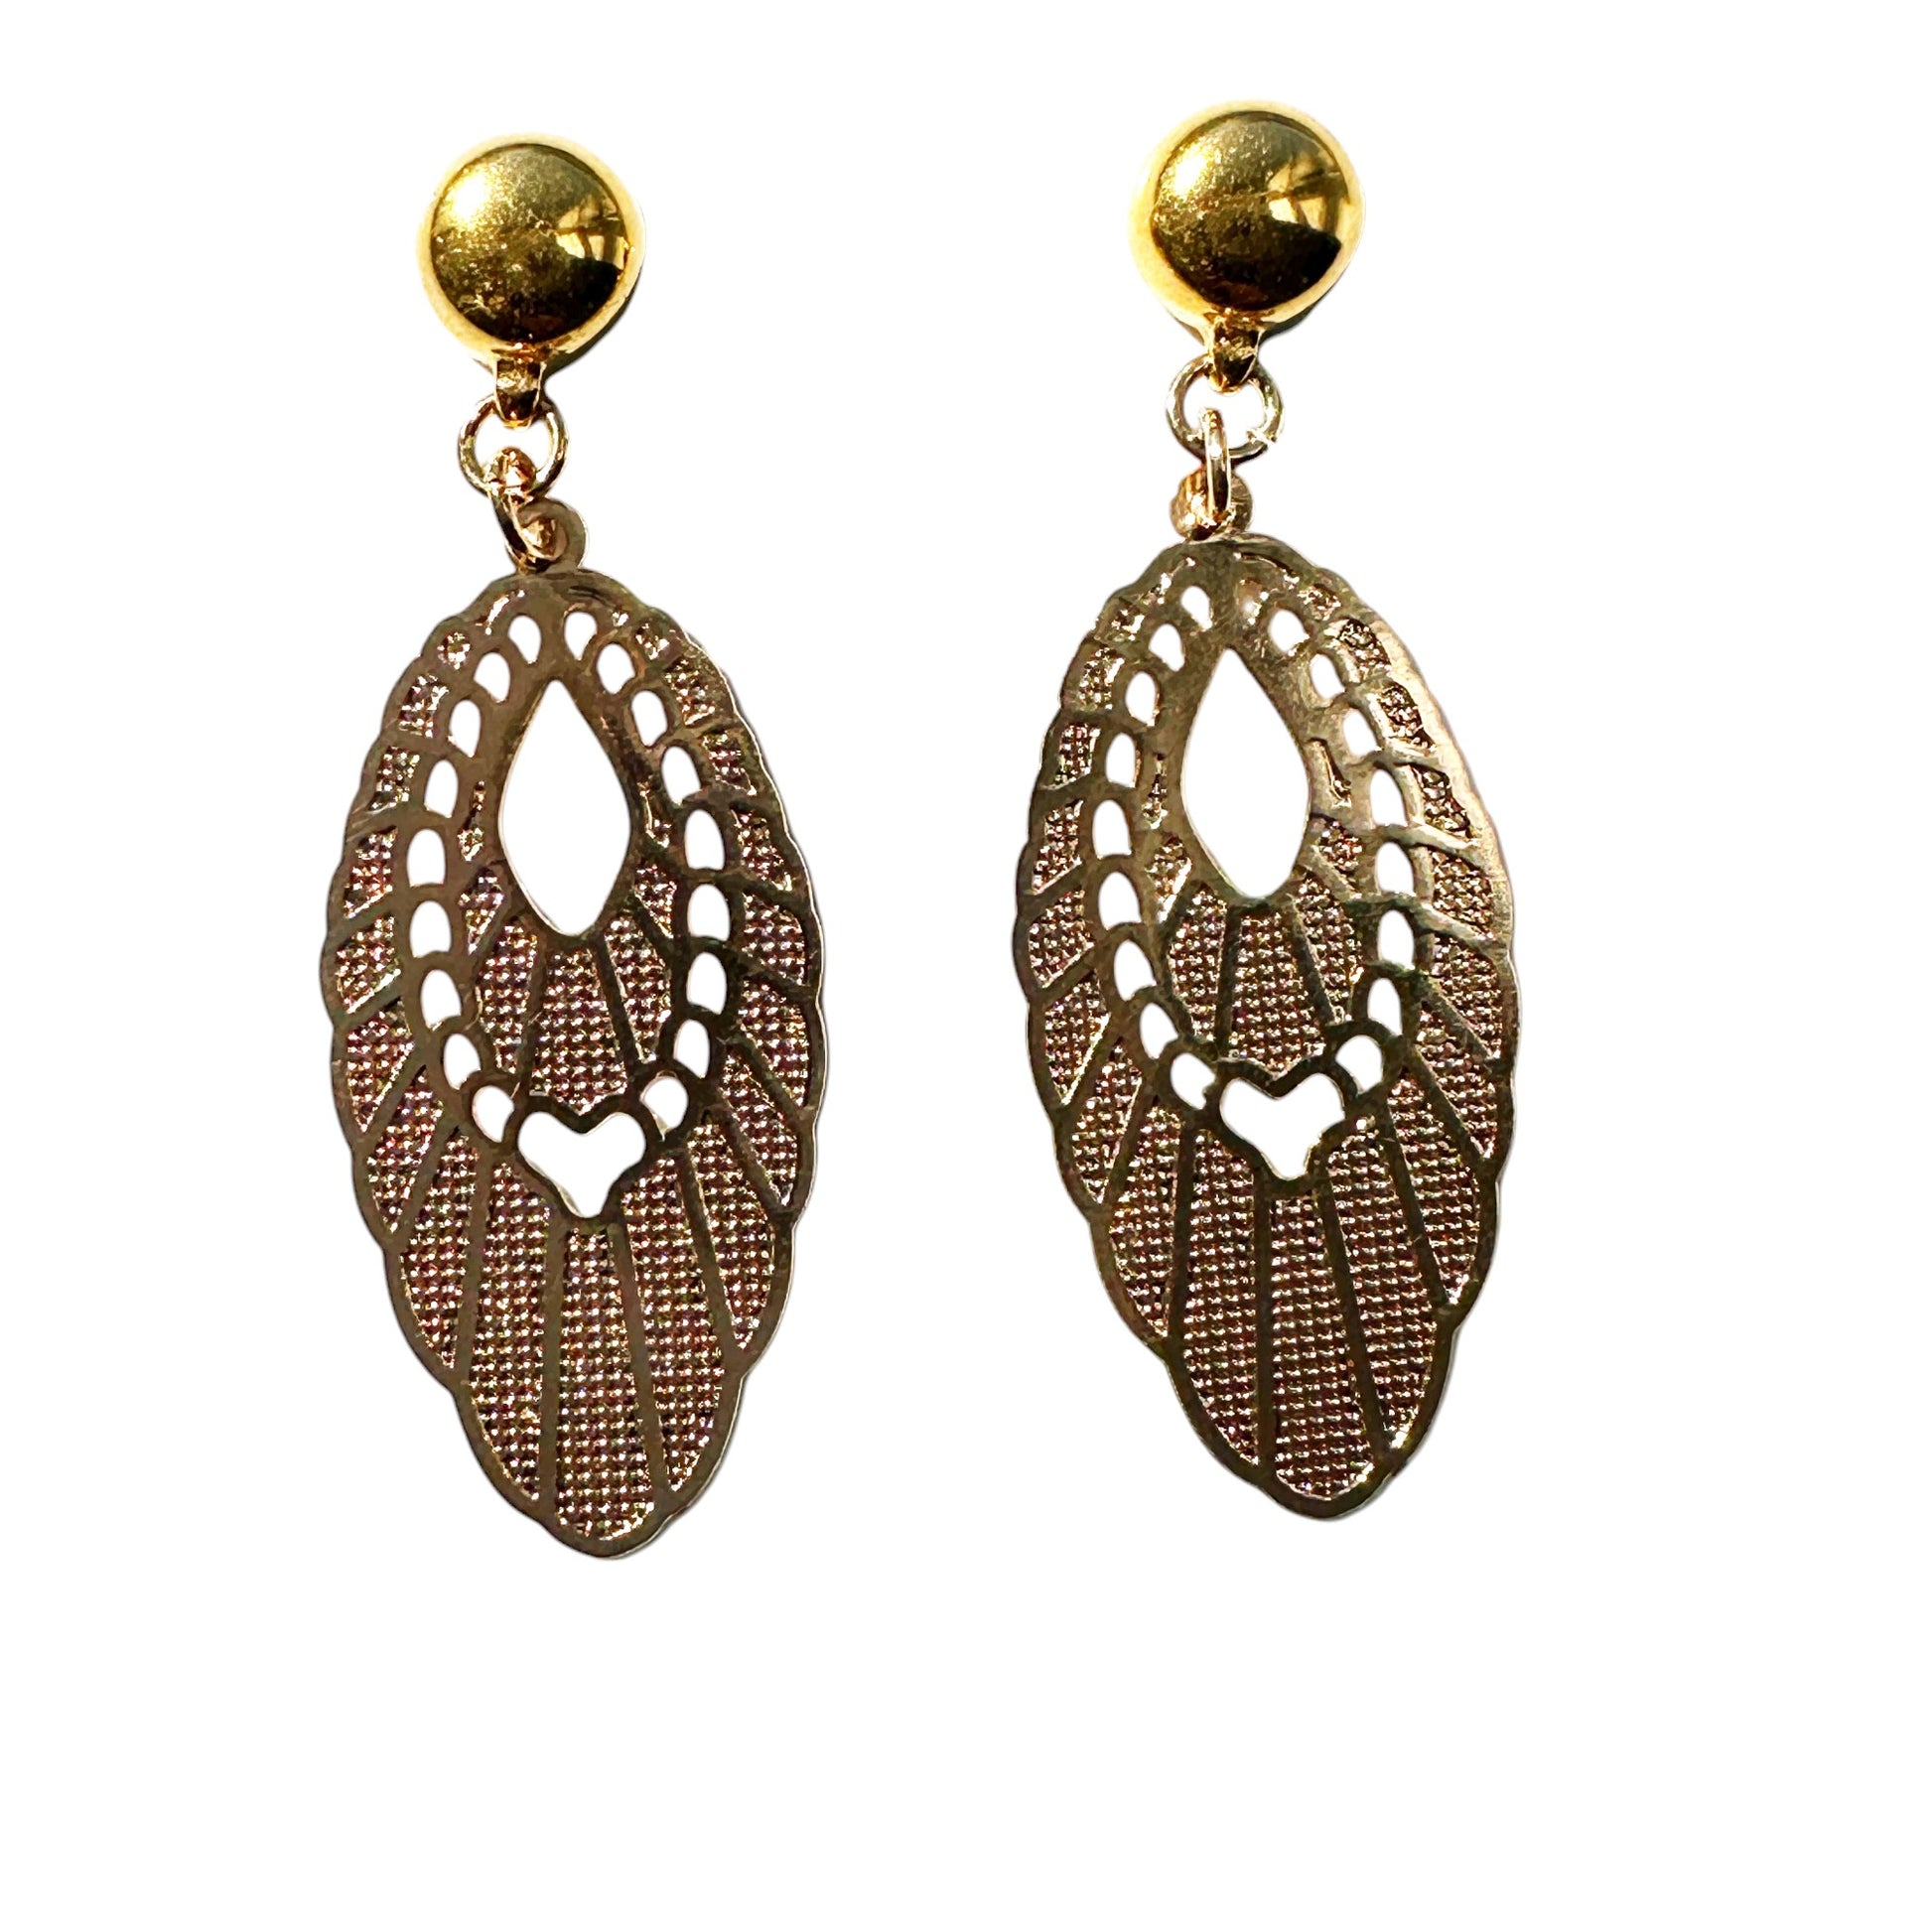 TI-GO Gold Pendant Earrings. Detachable earrings for a truly hypoallergenic jewellery on a white background